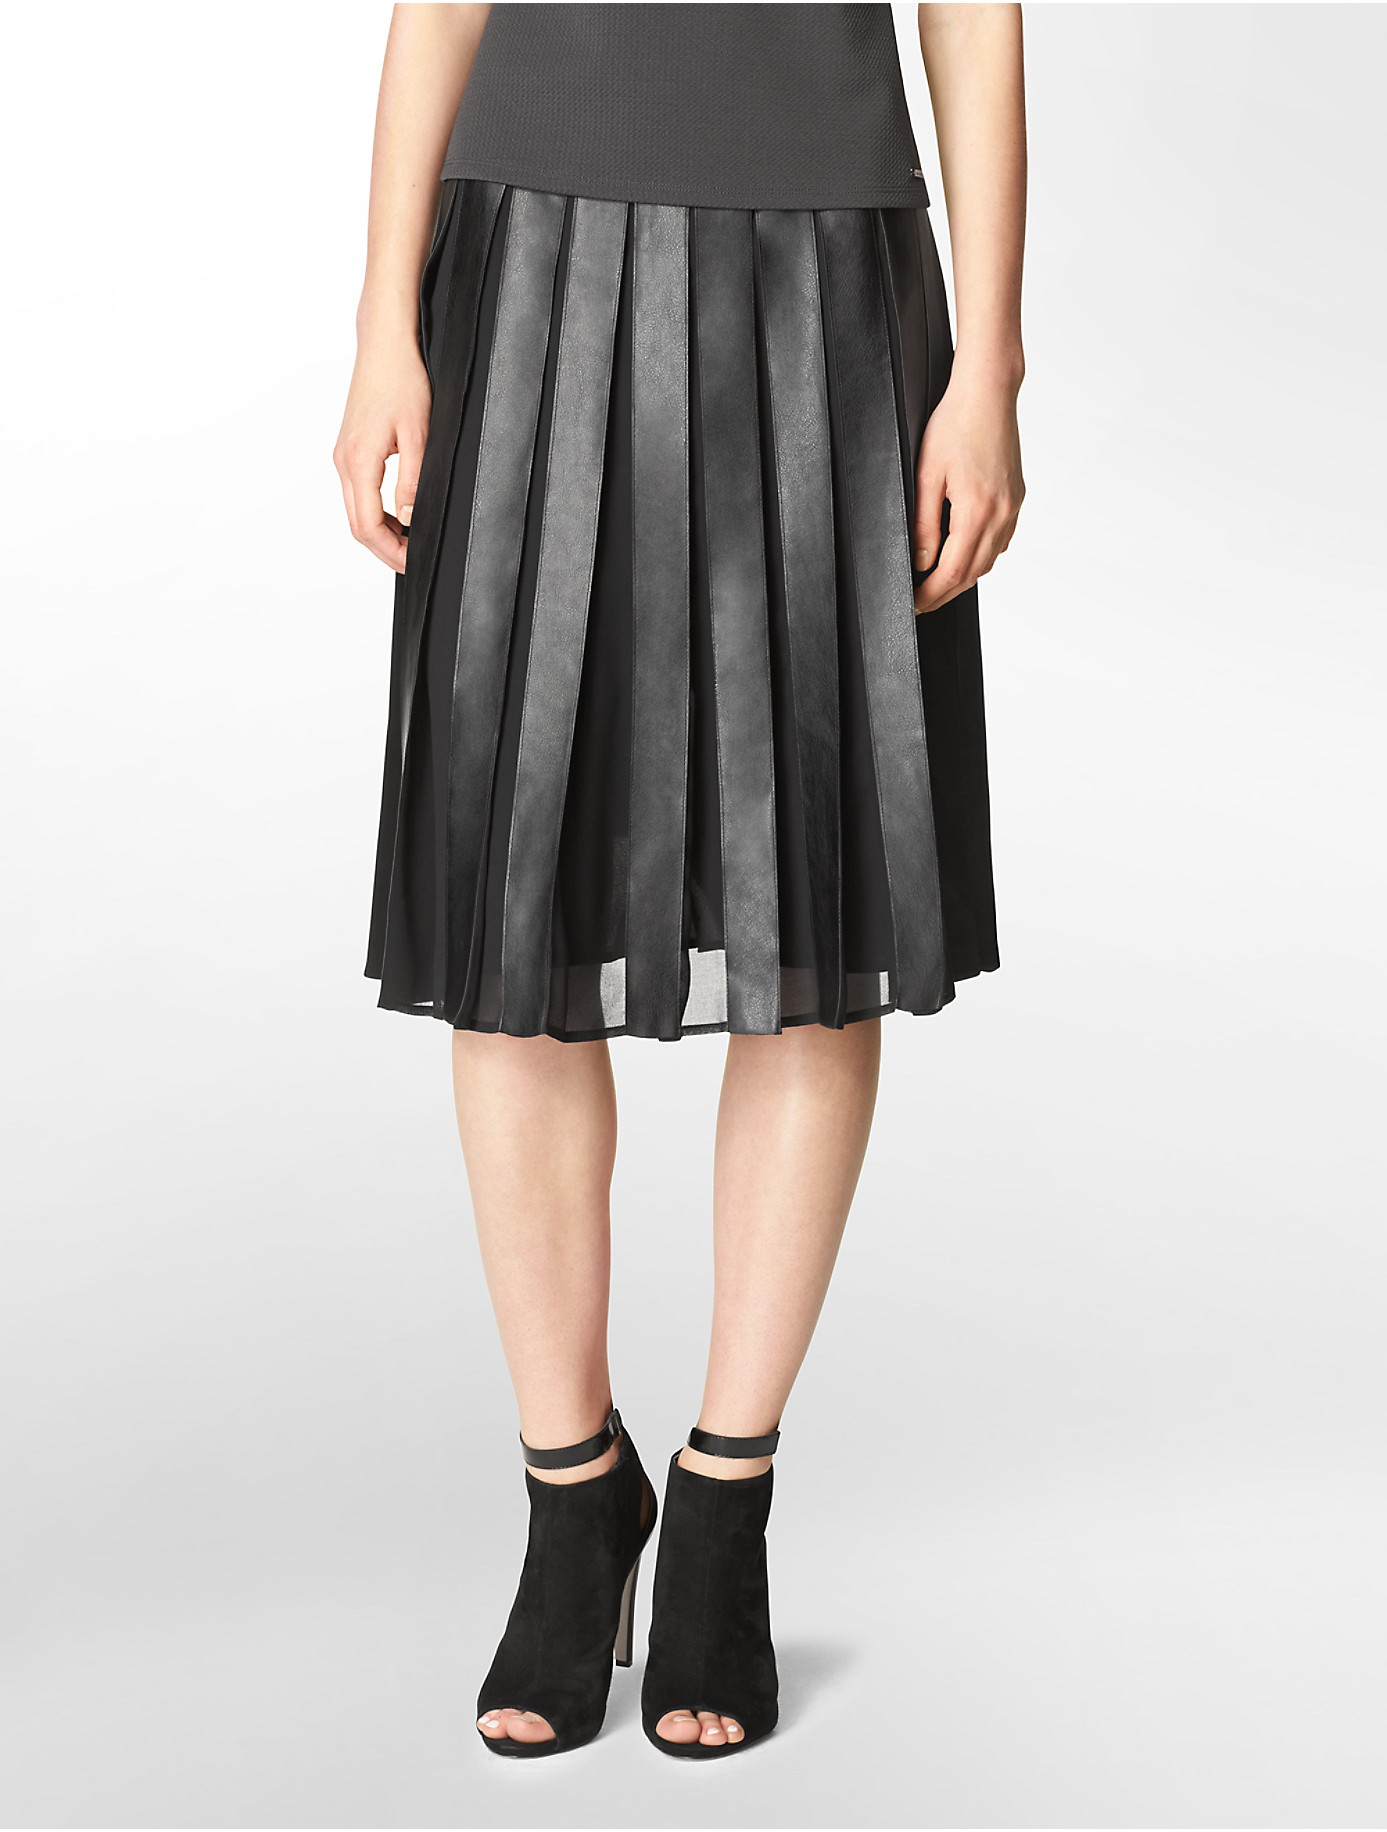 Calvin klein White Label Faux Leather + Chiffon Pleated Skirt in Black ...